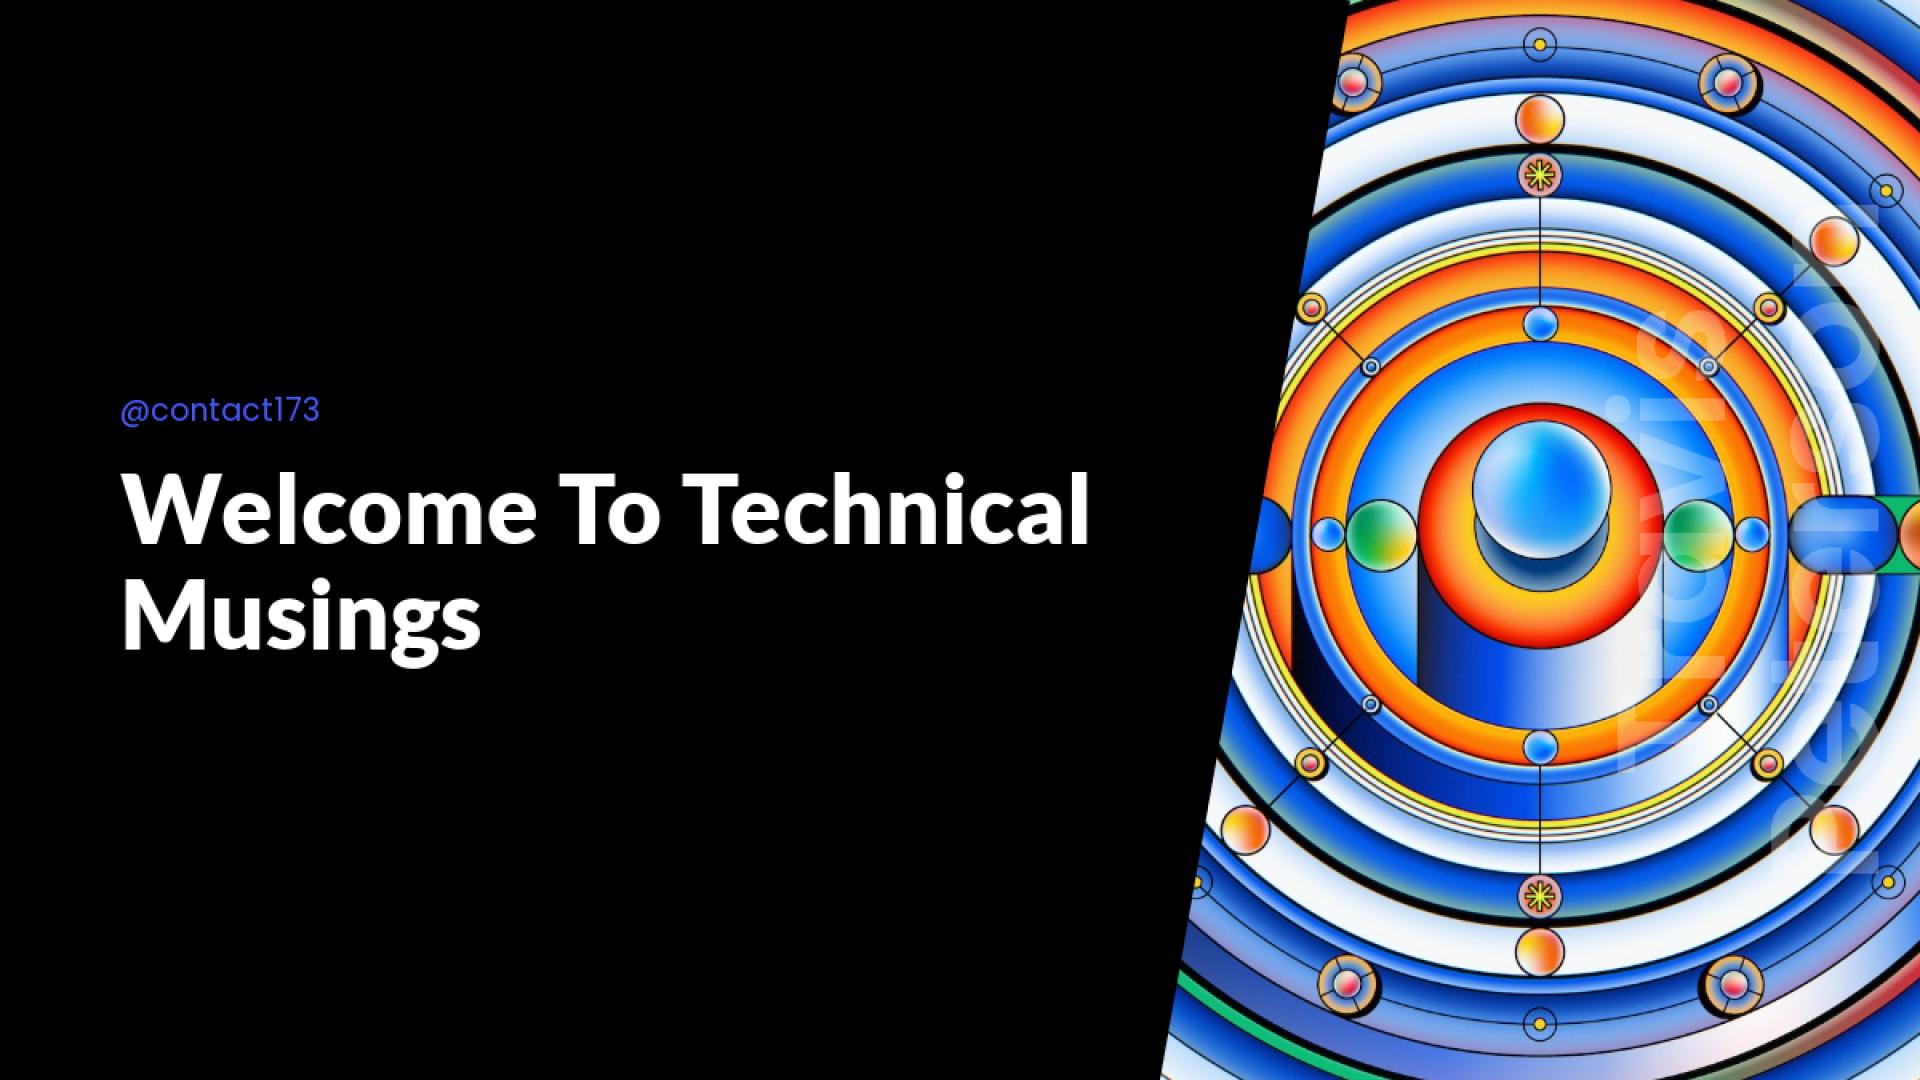 Welcome To Technical Musings